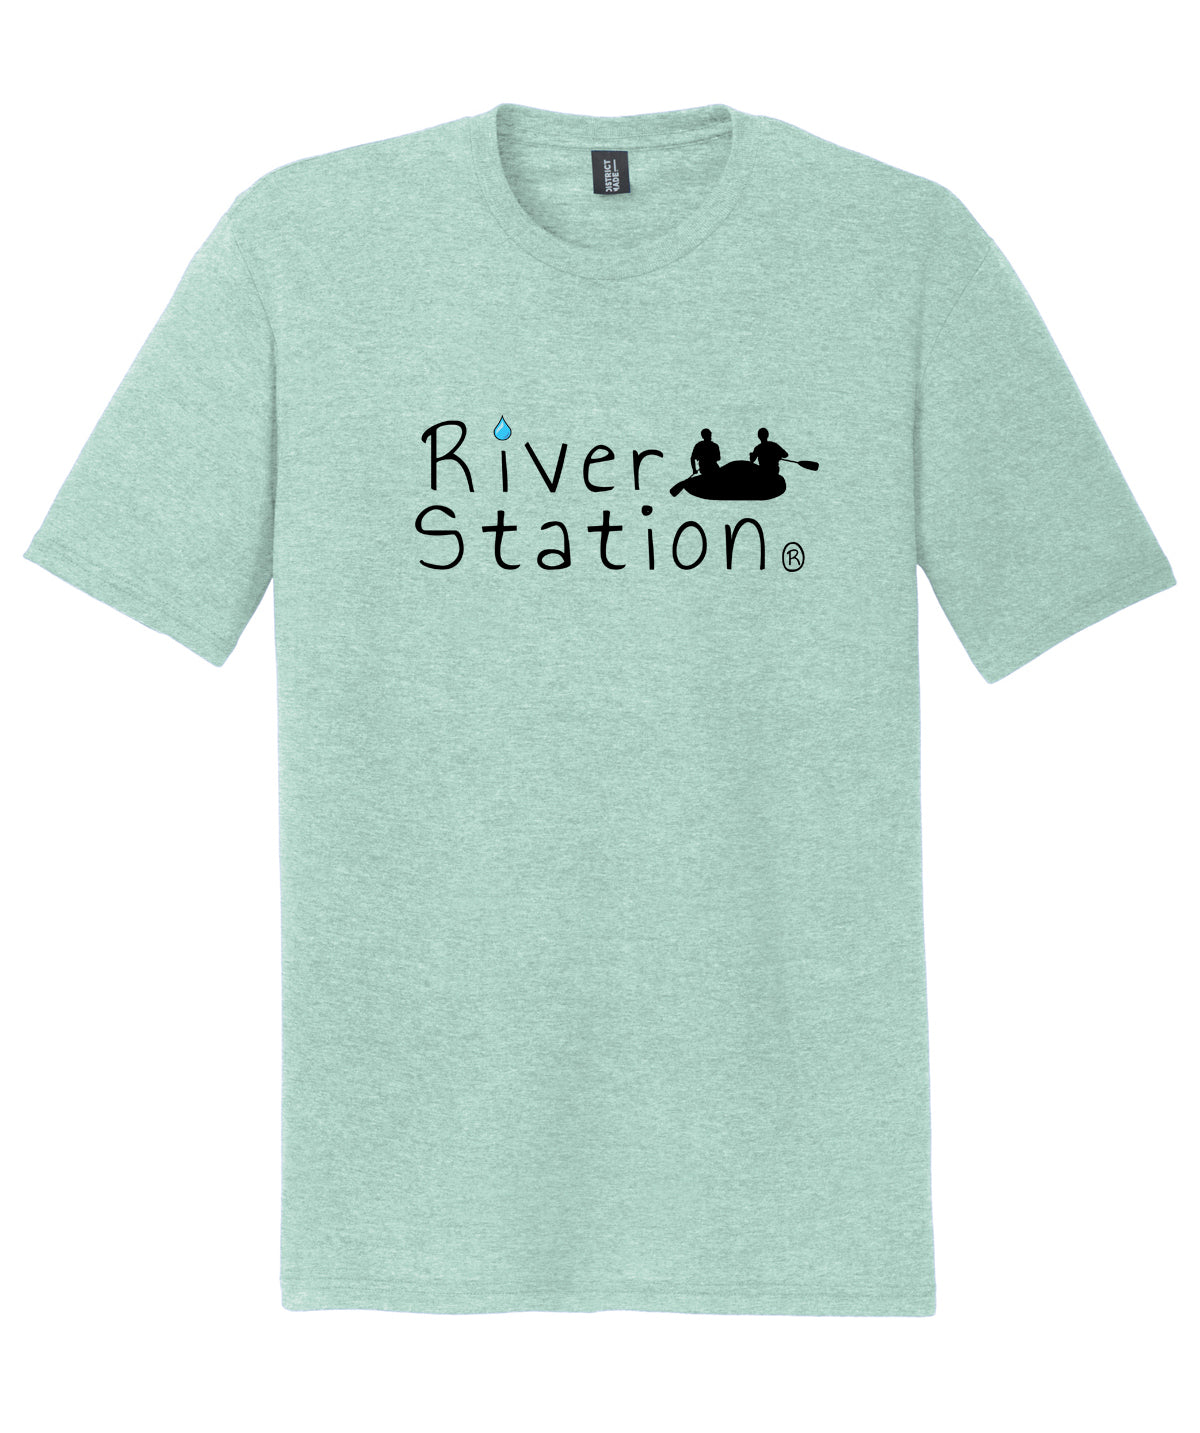 River Station whitewater rafting gear t-shirt.